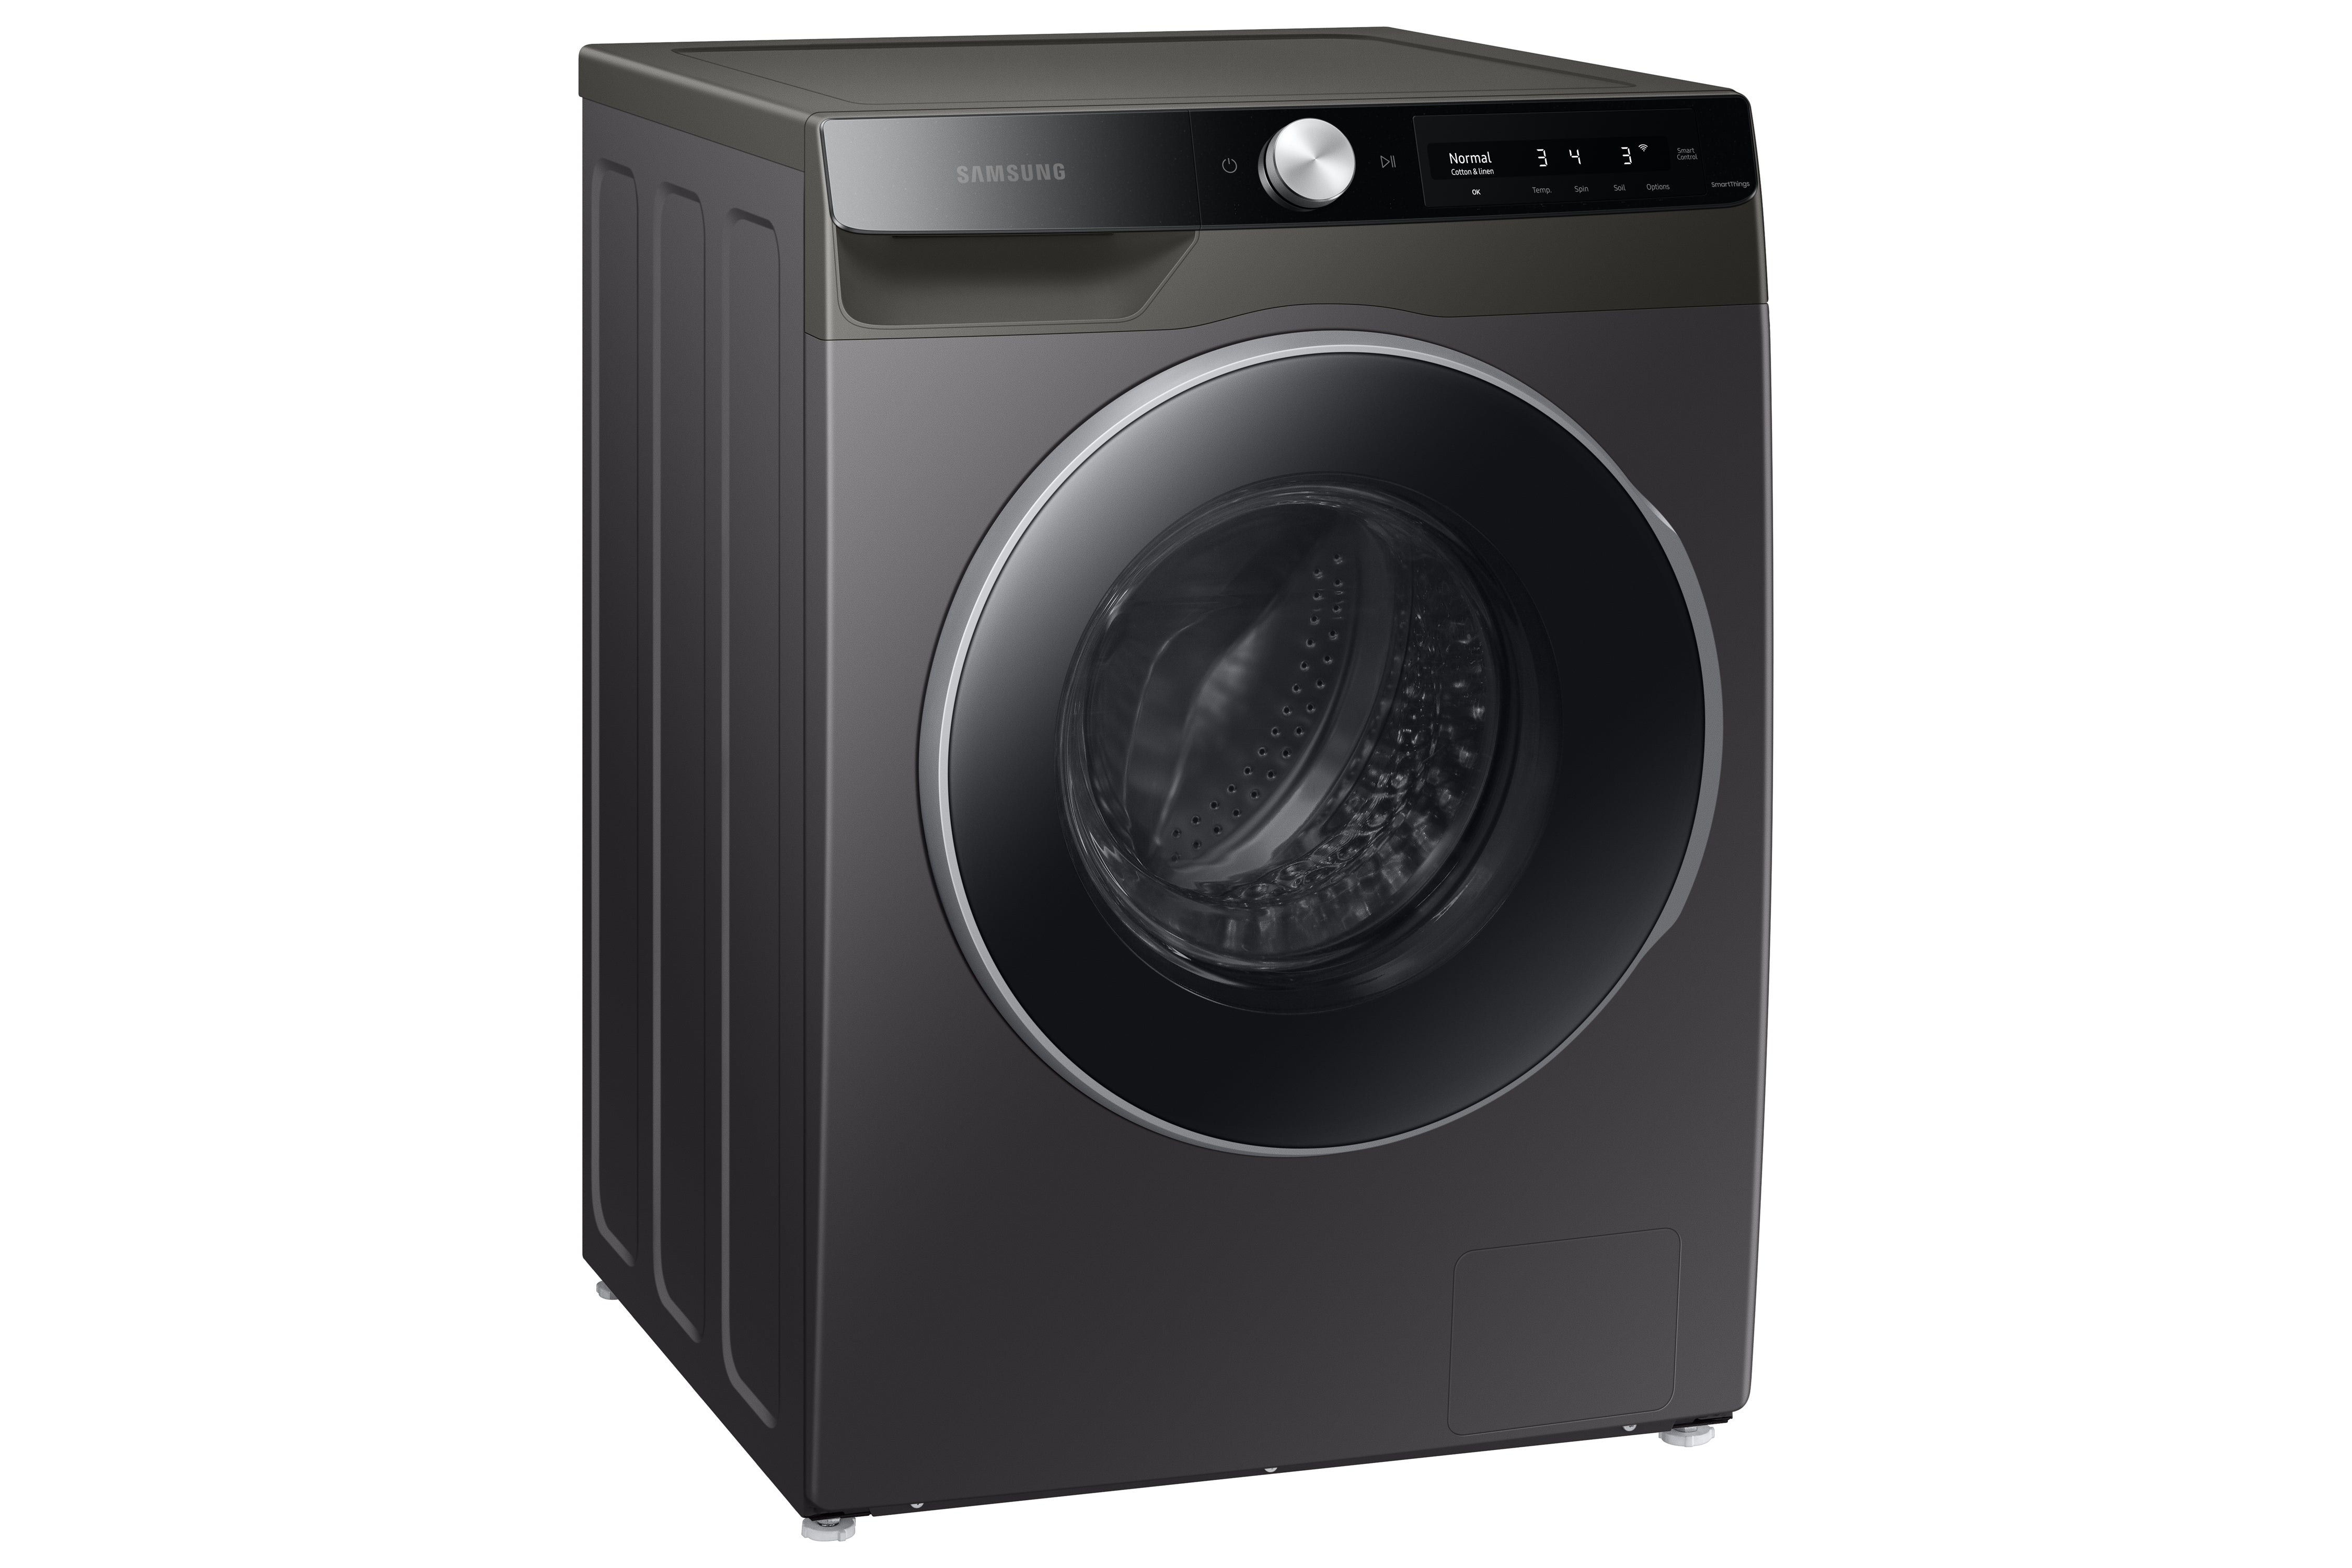 Samsung - 2.9 cu. Ft  Front Load Washer in Grey - WW25B6900AX